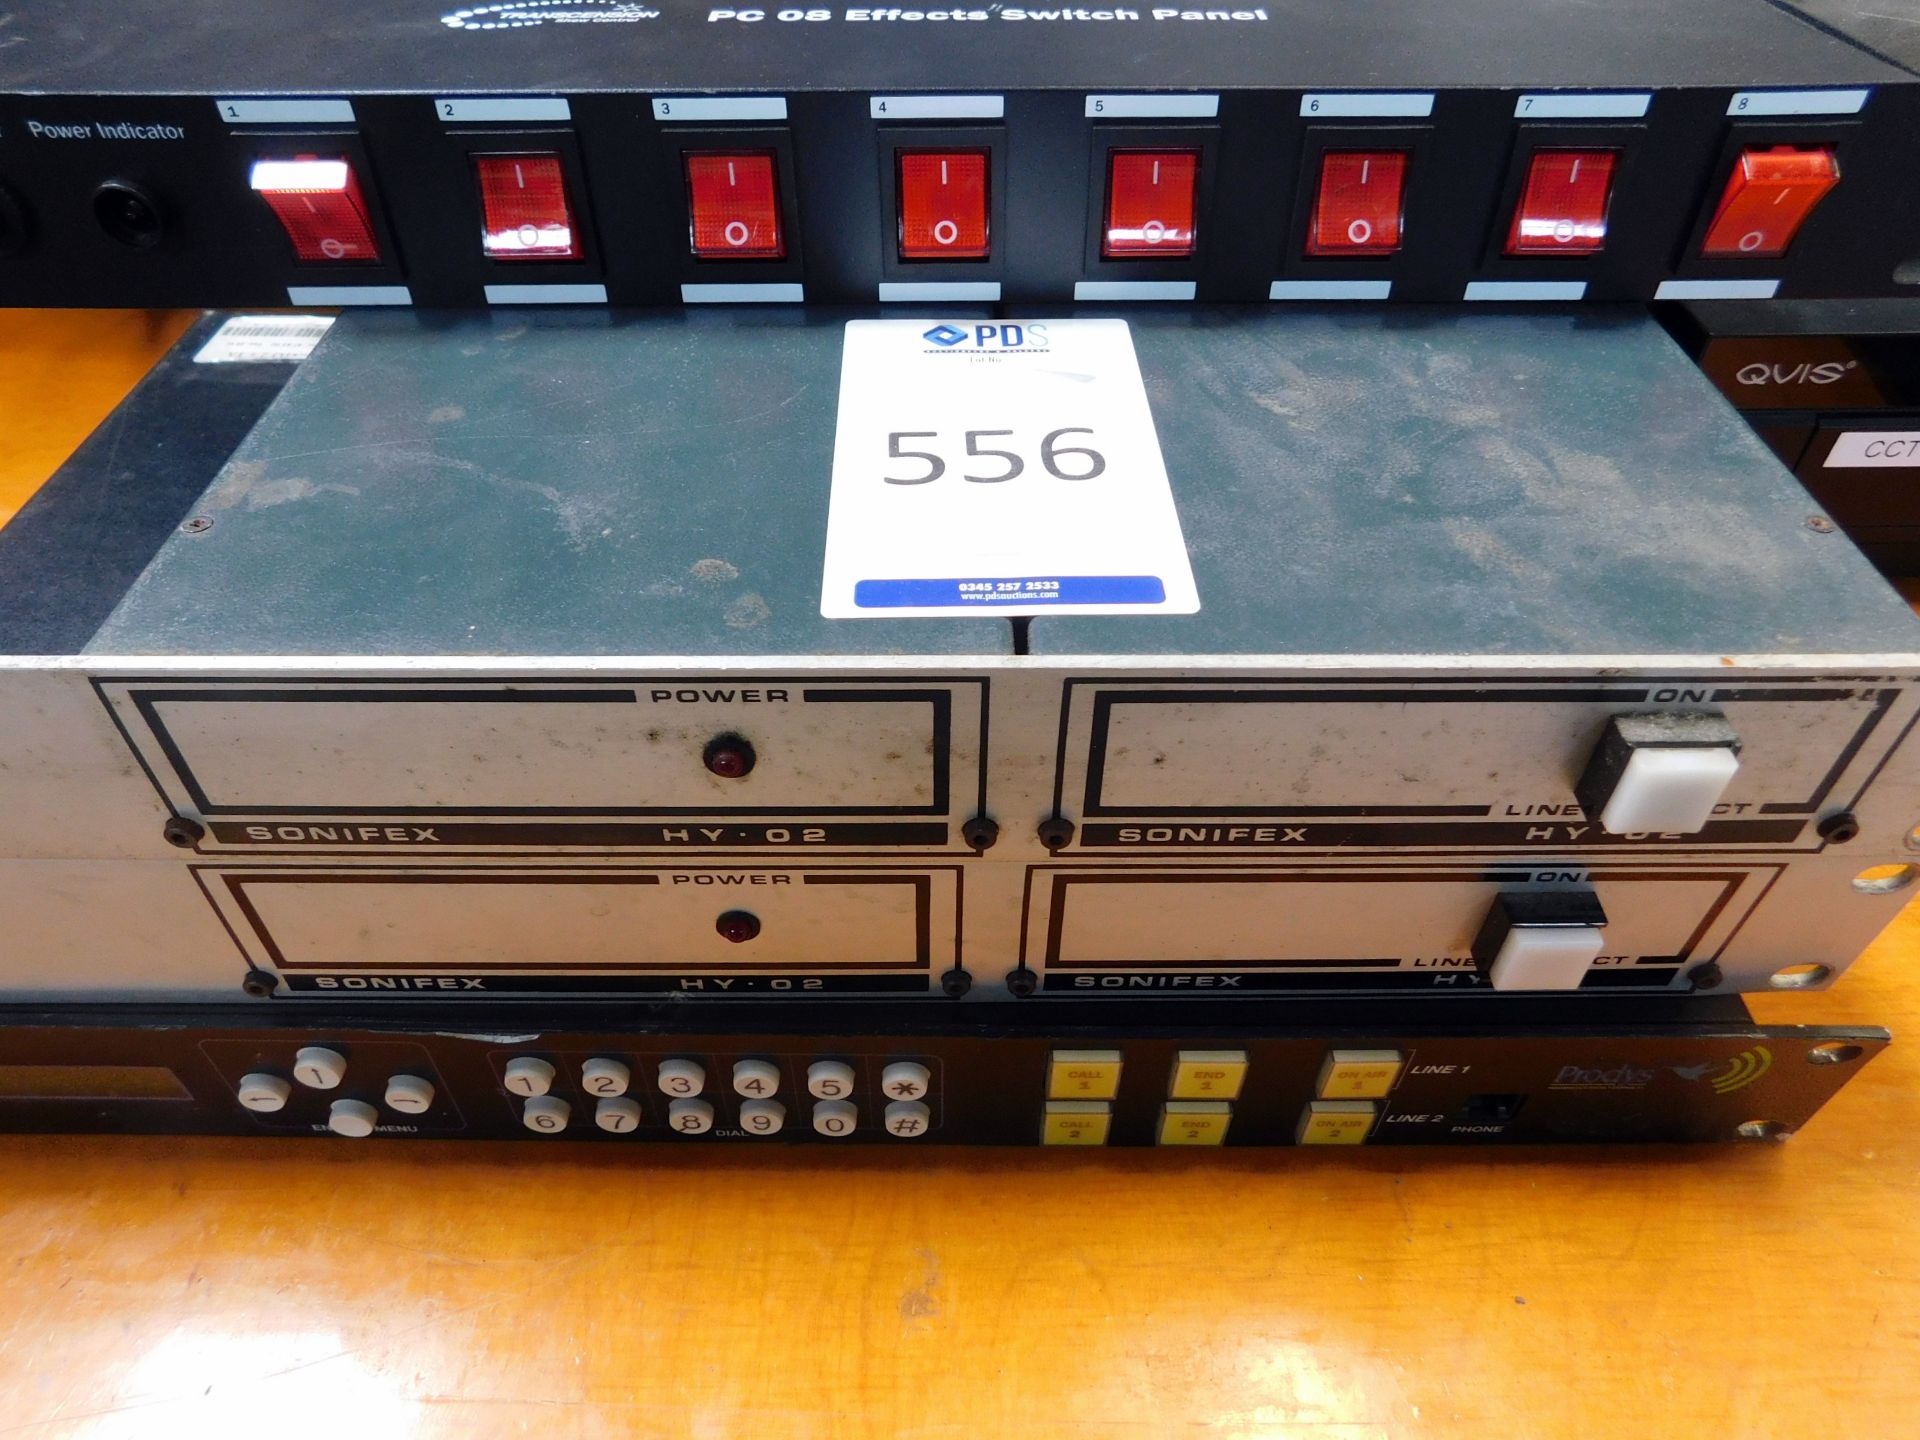 2 Sonifex HY02 Line Connectors, Transcension PC08 Effect Switch Panel & Pronto ISDN 2 (Located